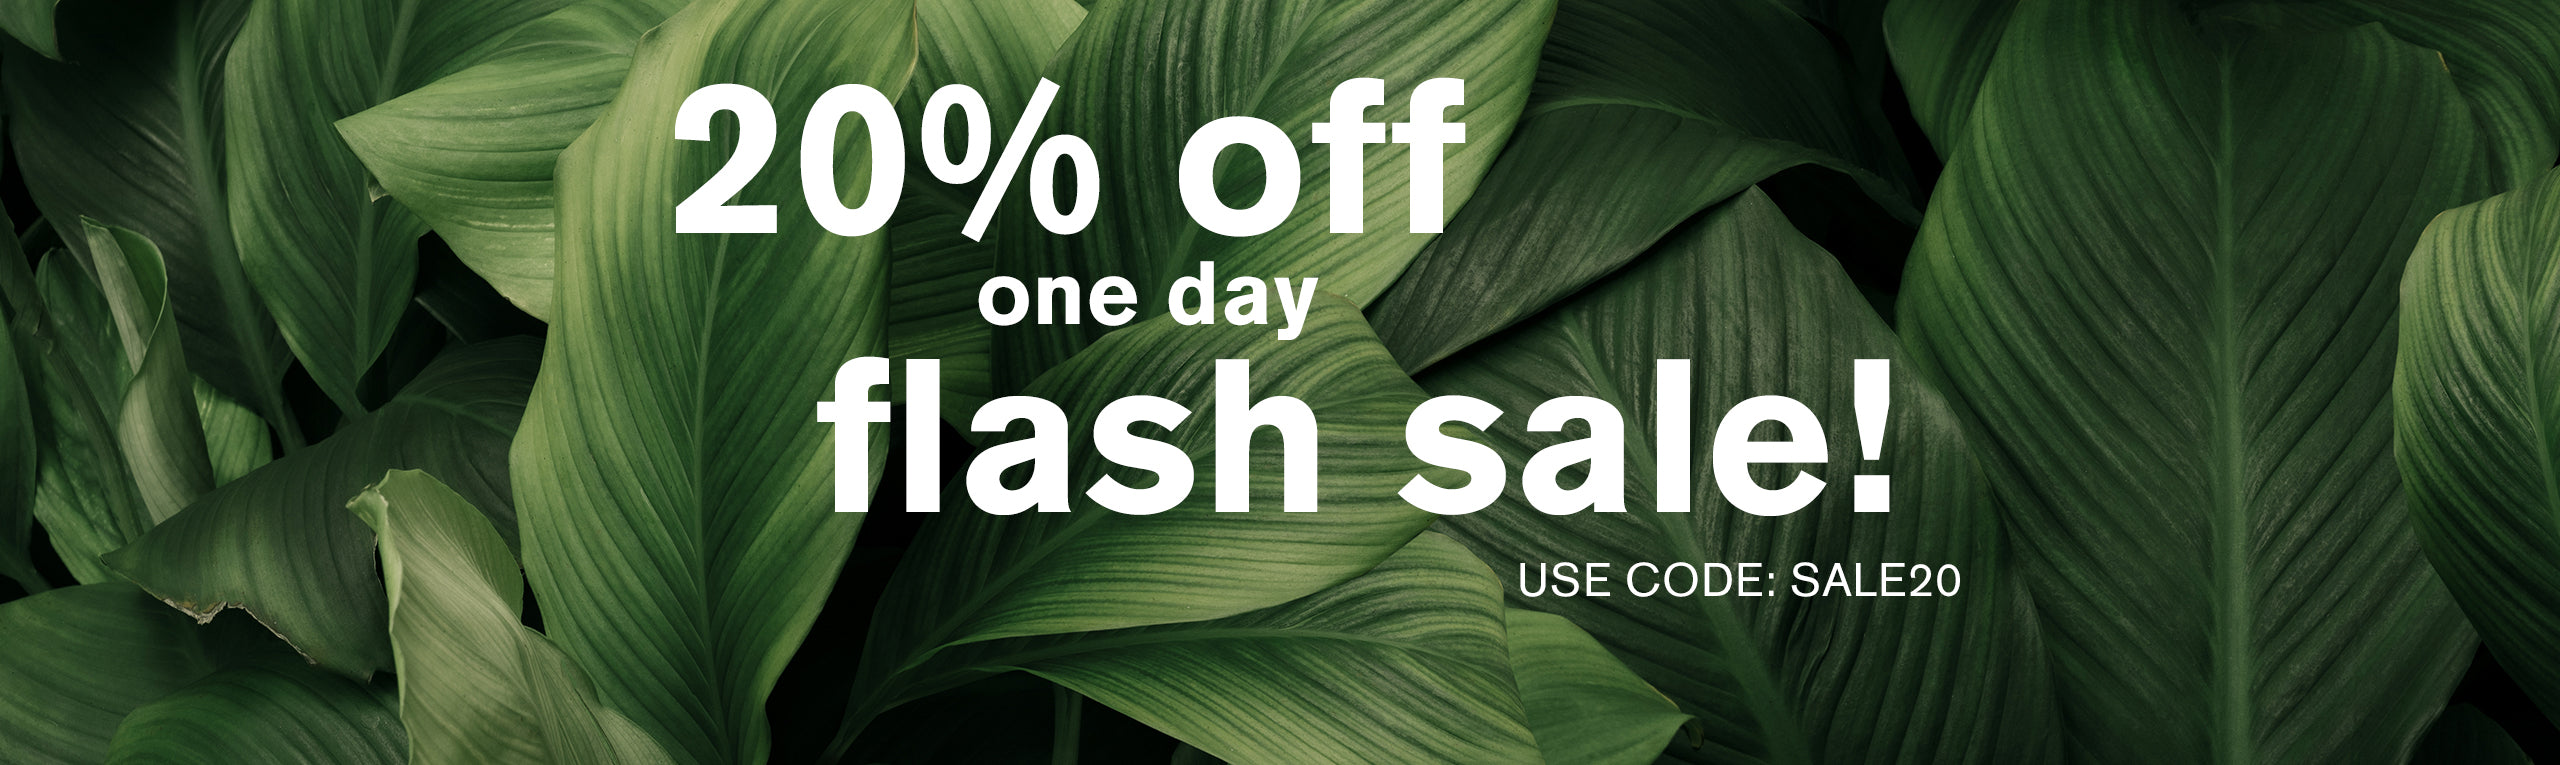 20% off flash sale with code SALE20